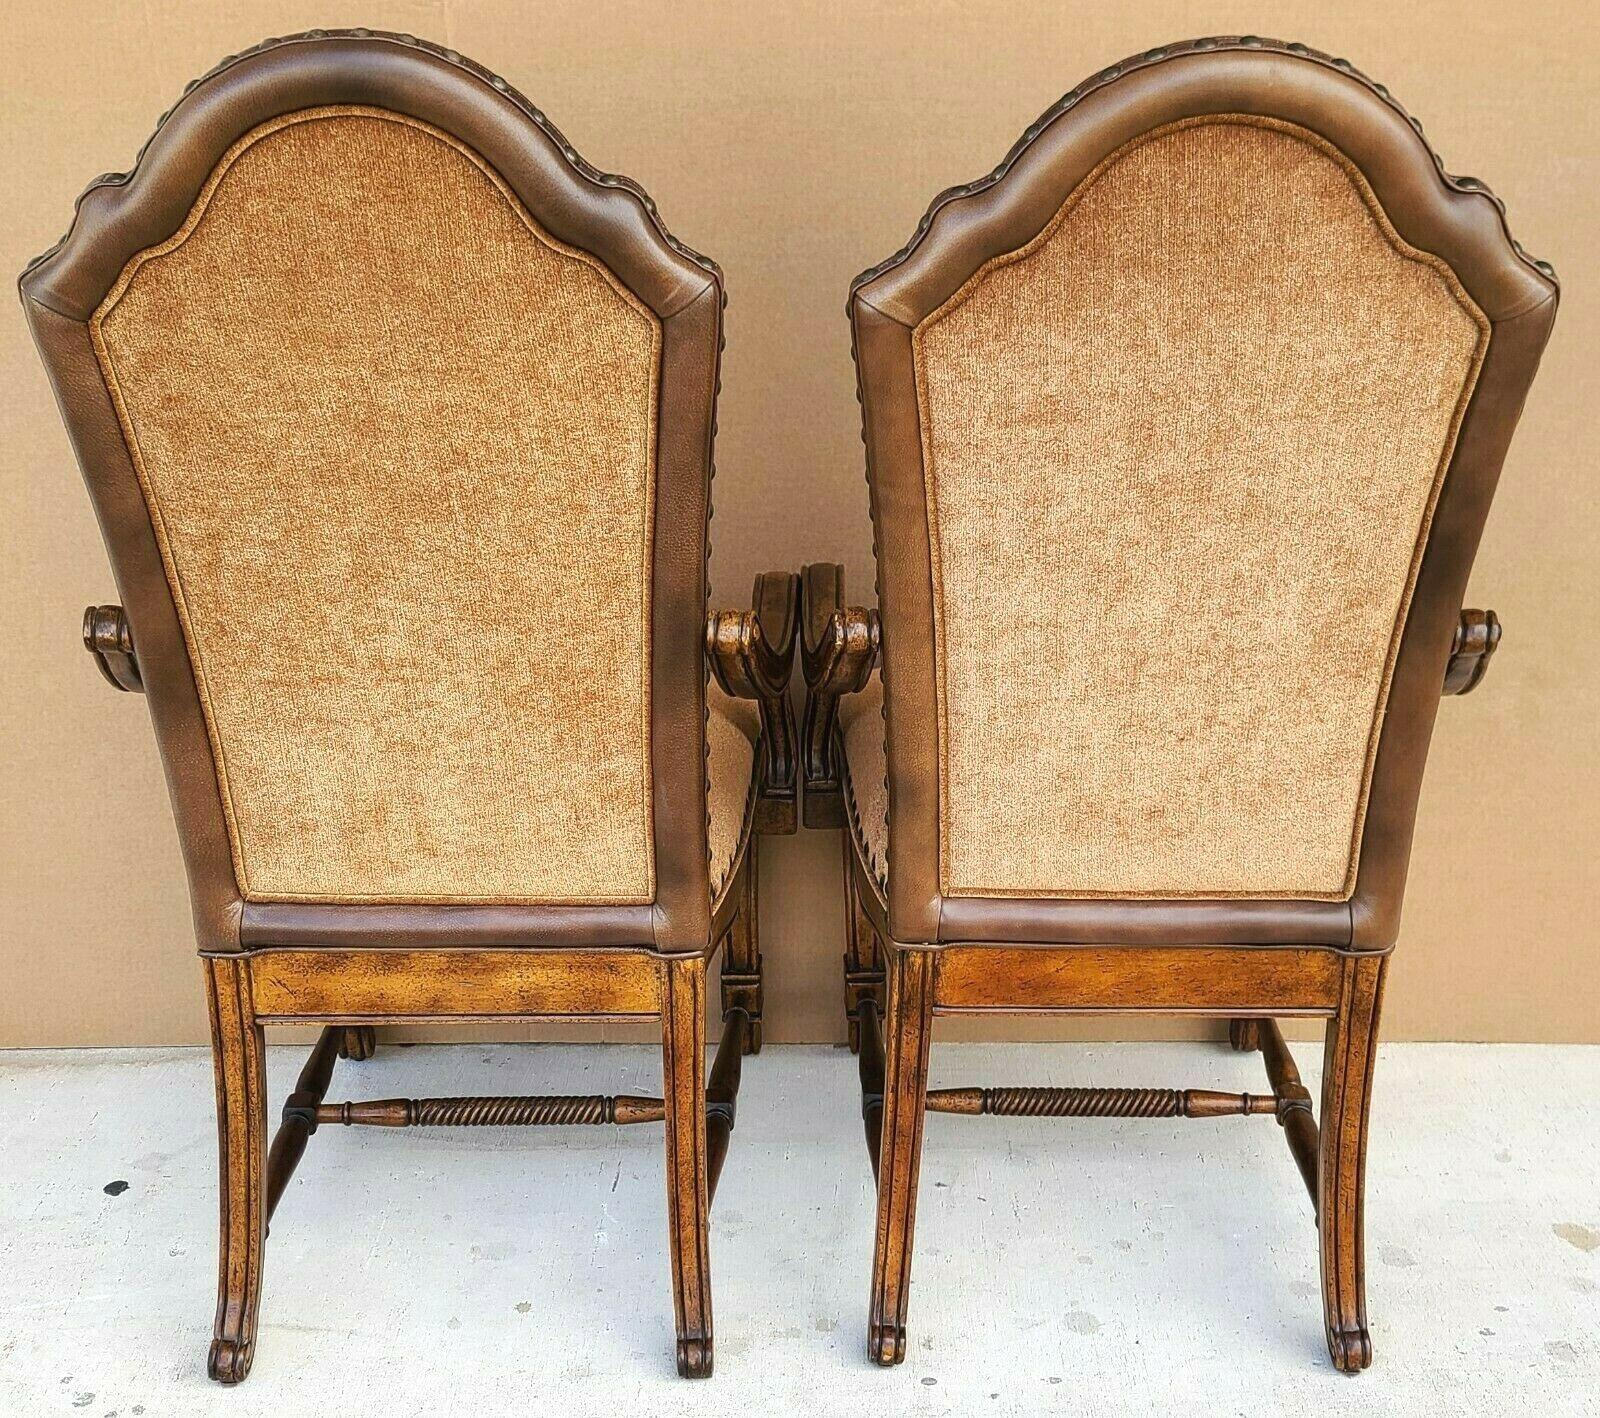 Michael Amini Sedgewicke Dining Armchairs In Good Condition For Sale In Lake Worth, FL